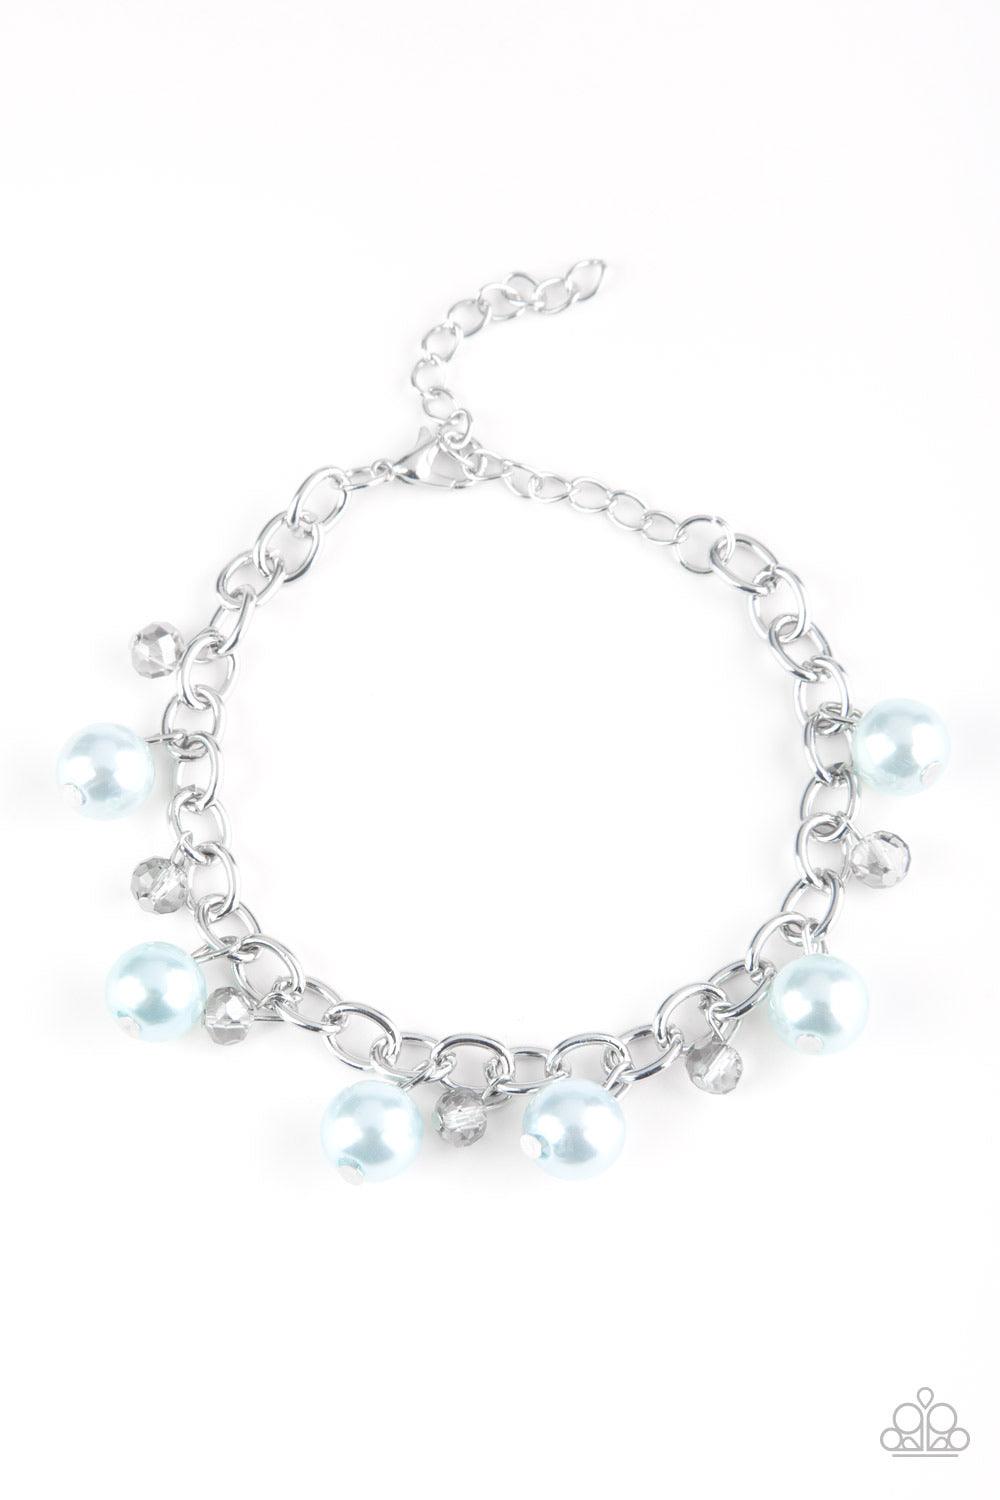 Paparazzi Accessories Country Club Chic - Blue Classic blue pearls and smoky crystal-like beads dangle from a shimmery silver chain, creating a refined fringe around the wrist. Features an adjustable clasp closure. Jewelry